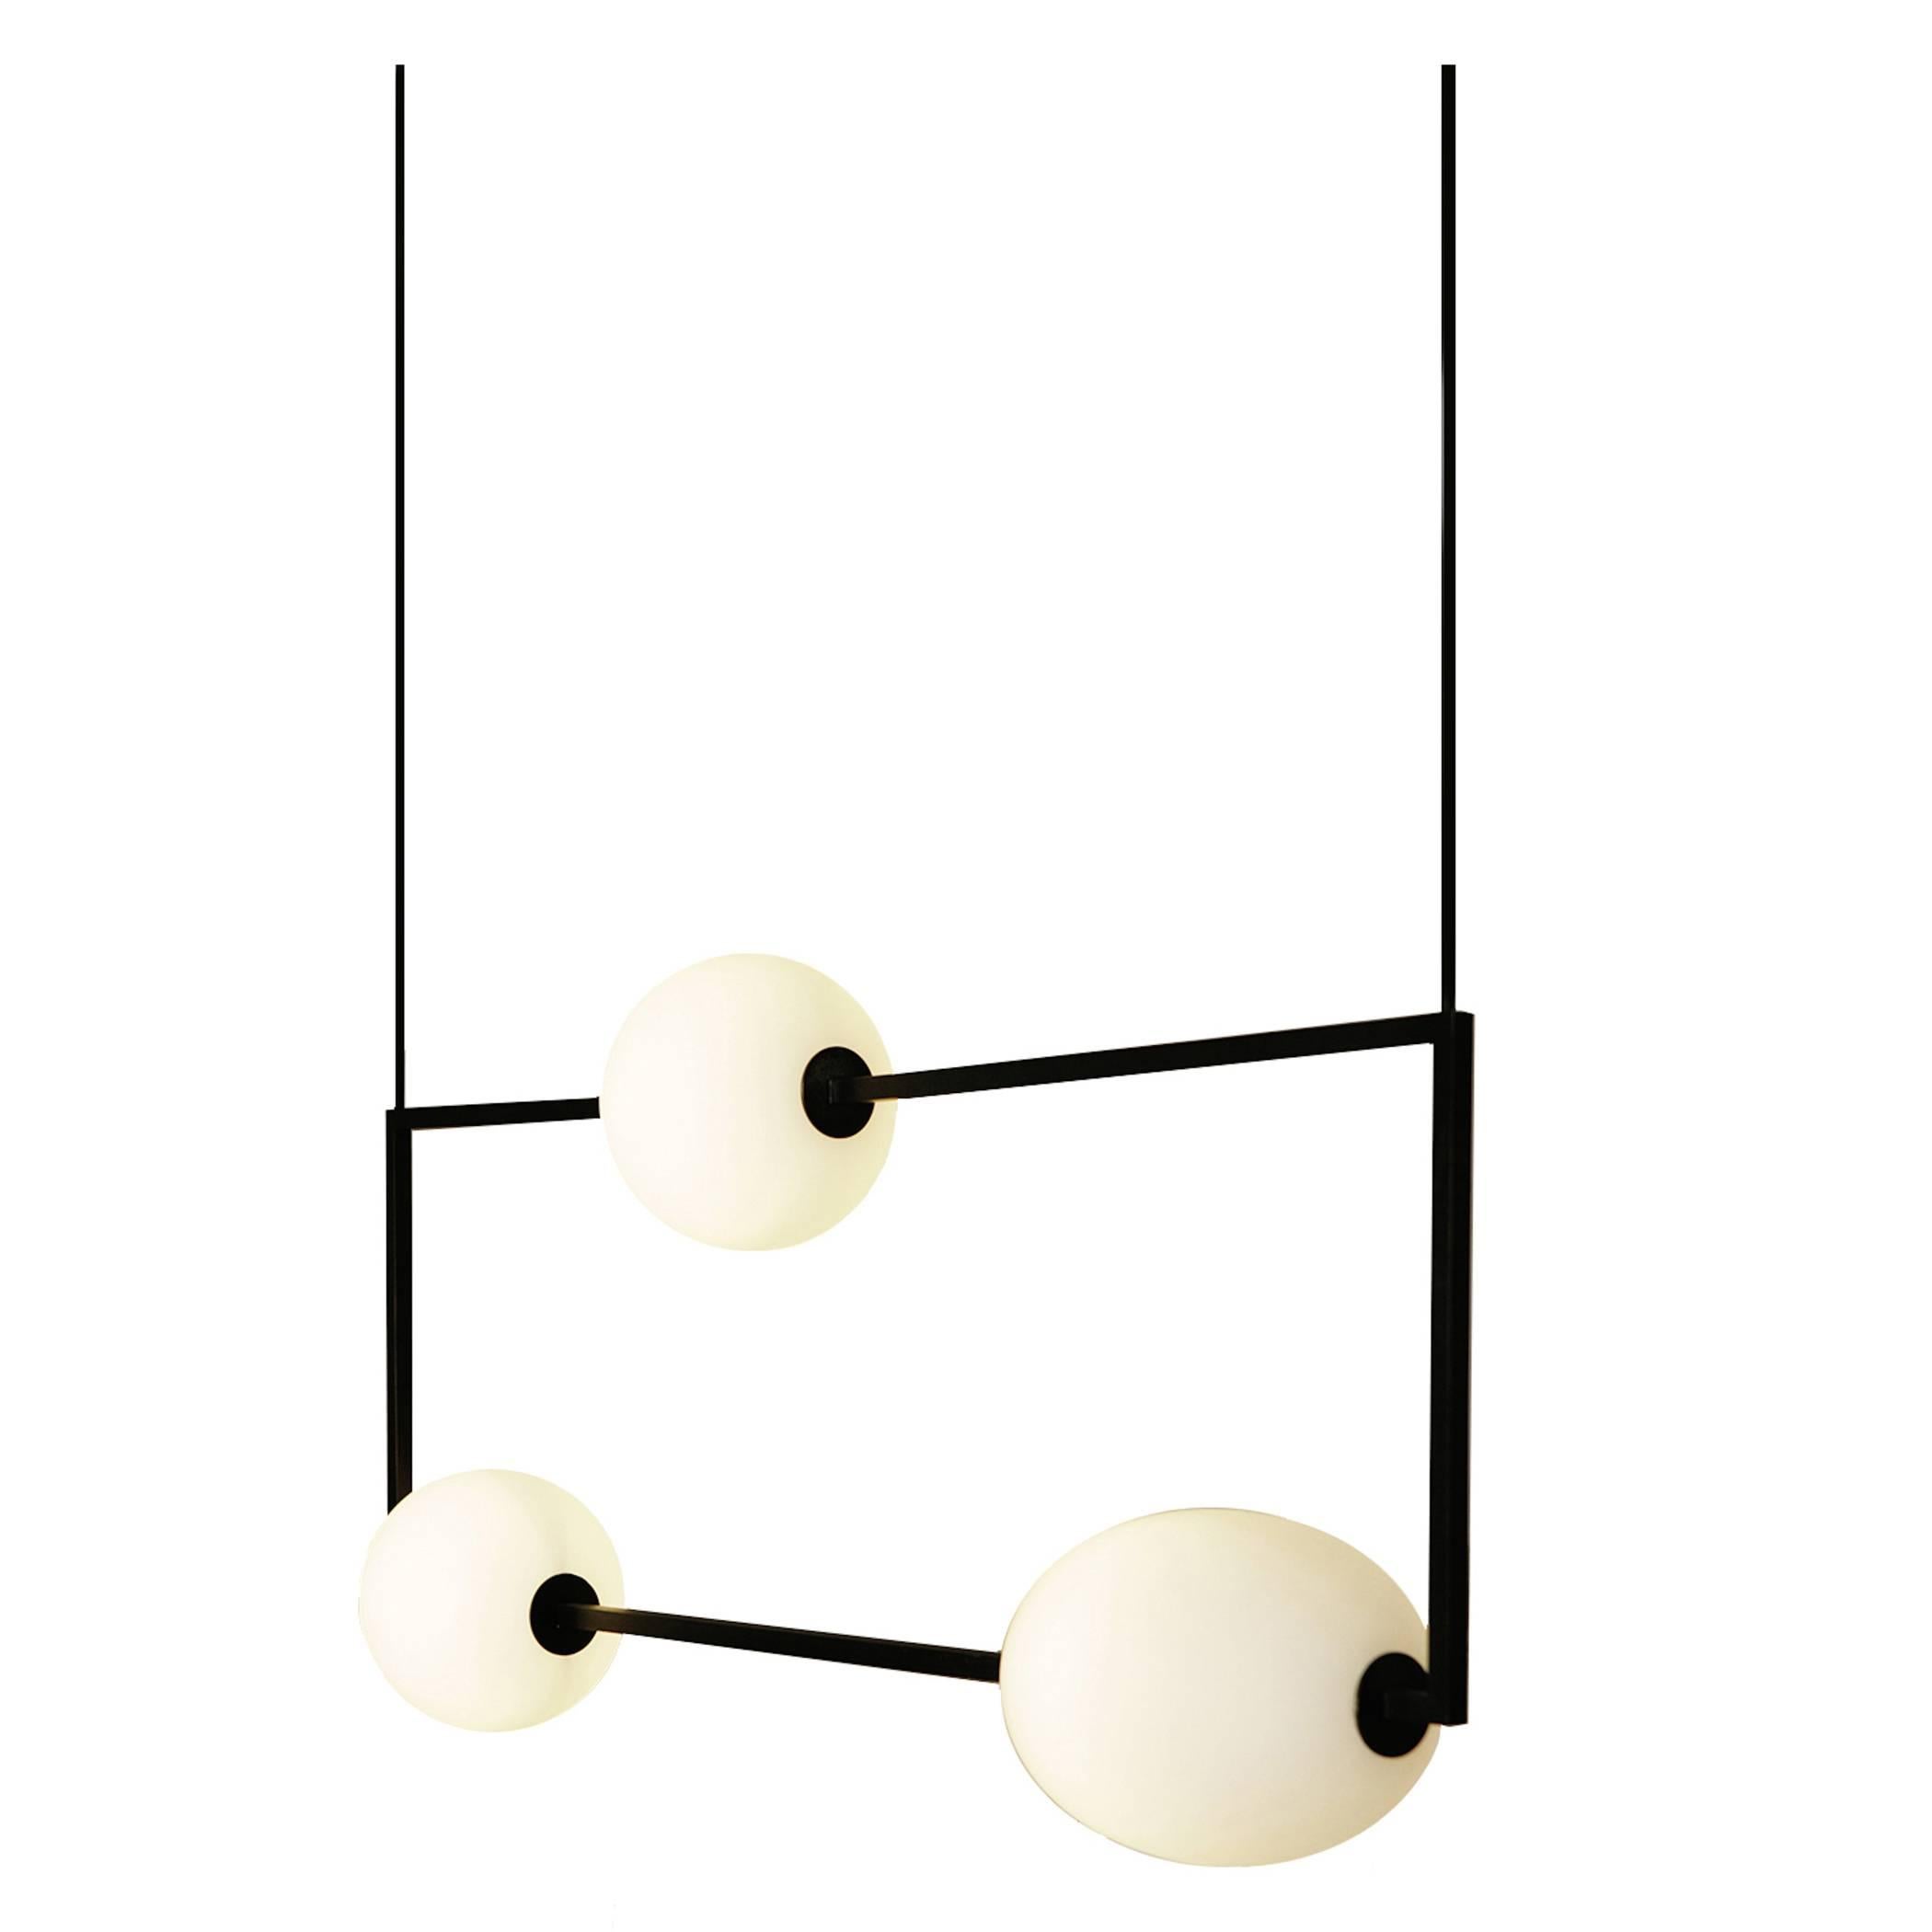 The Miro 3 is made of a single frame in a solid brass square stock. Finishes are blackened or unfinished brass. The glass shades are handblown, sand blasted and oiled. The wire is black cloth covered and can be ordered at a custom length. Hardware